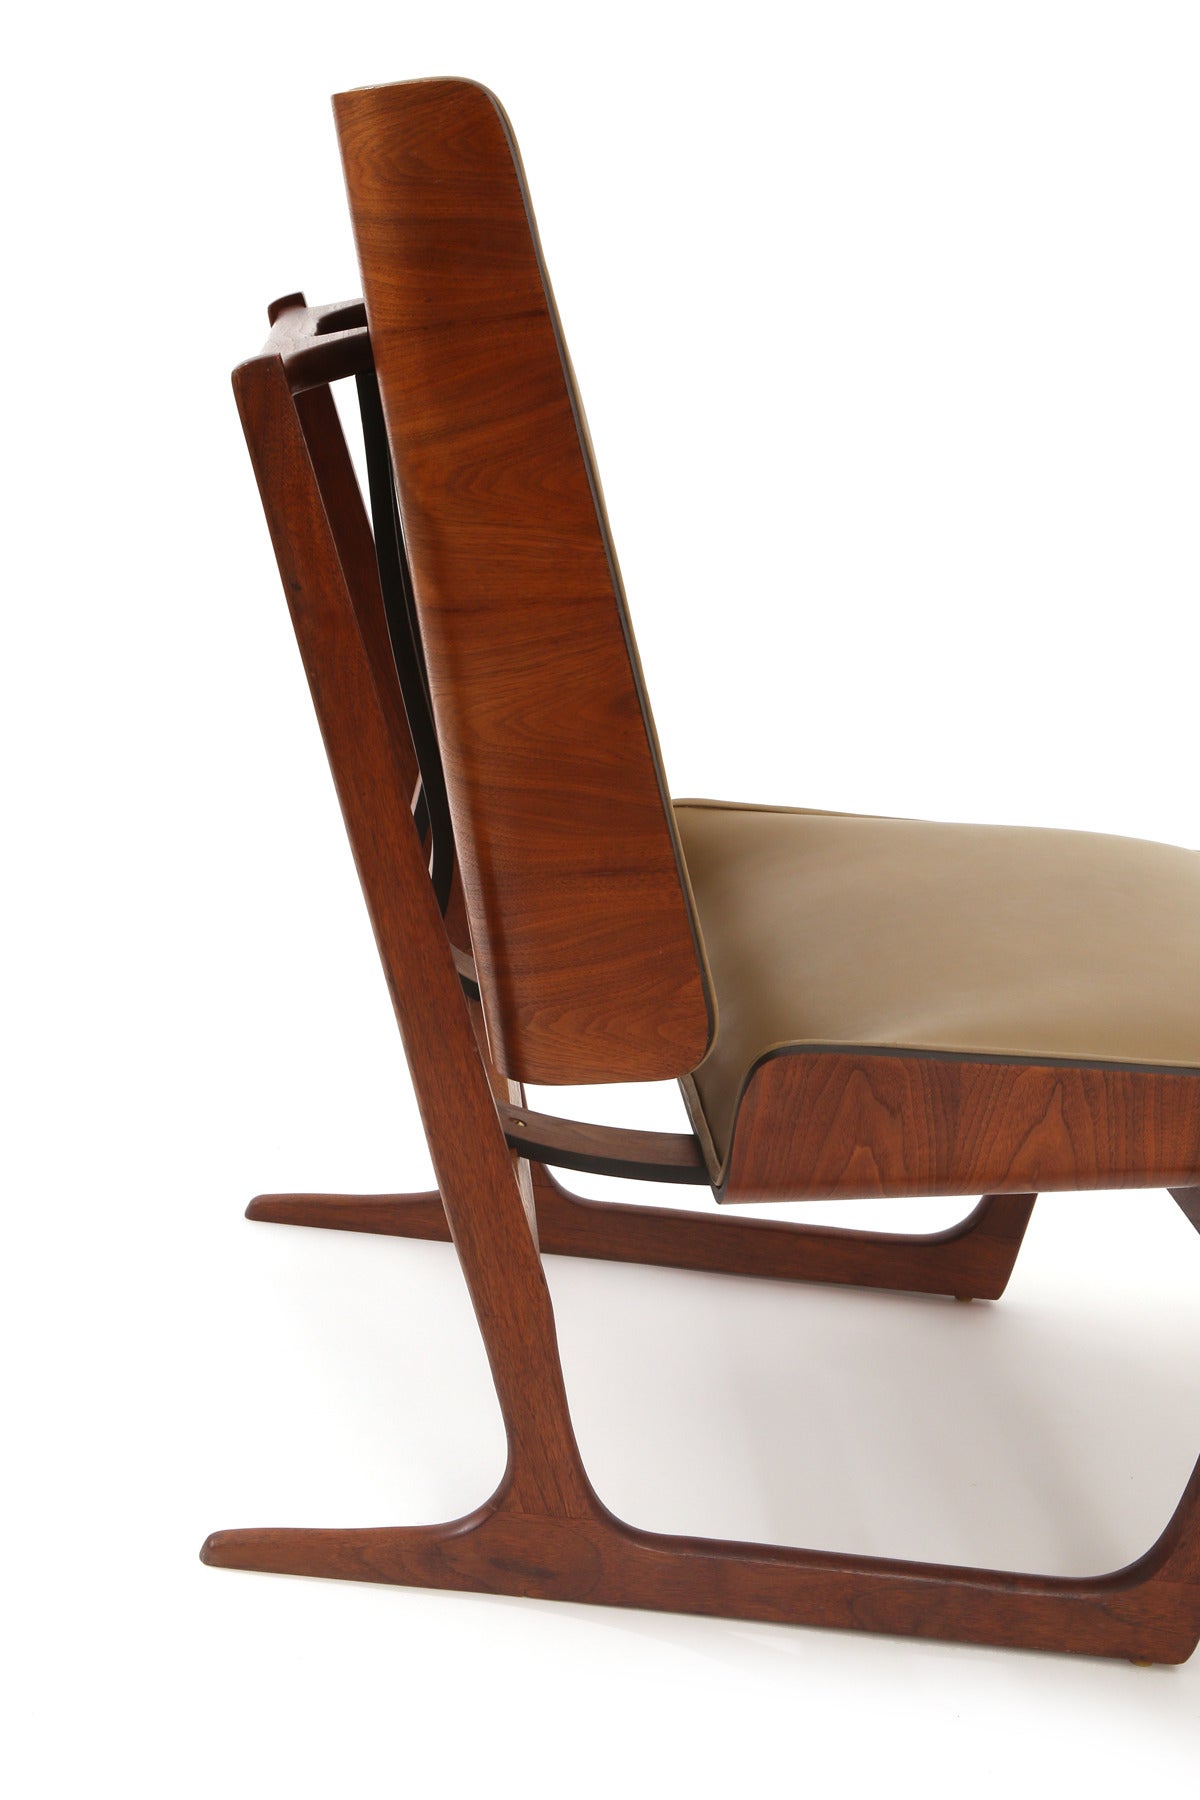 Mid-20th Century Stunning Bentwood and Leather Danish Sled Chair